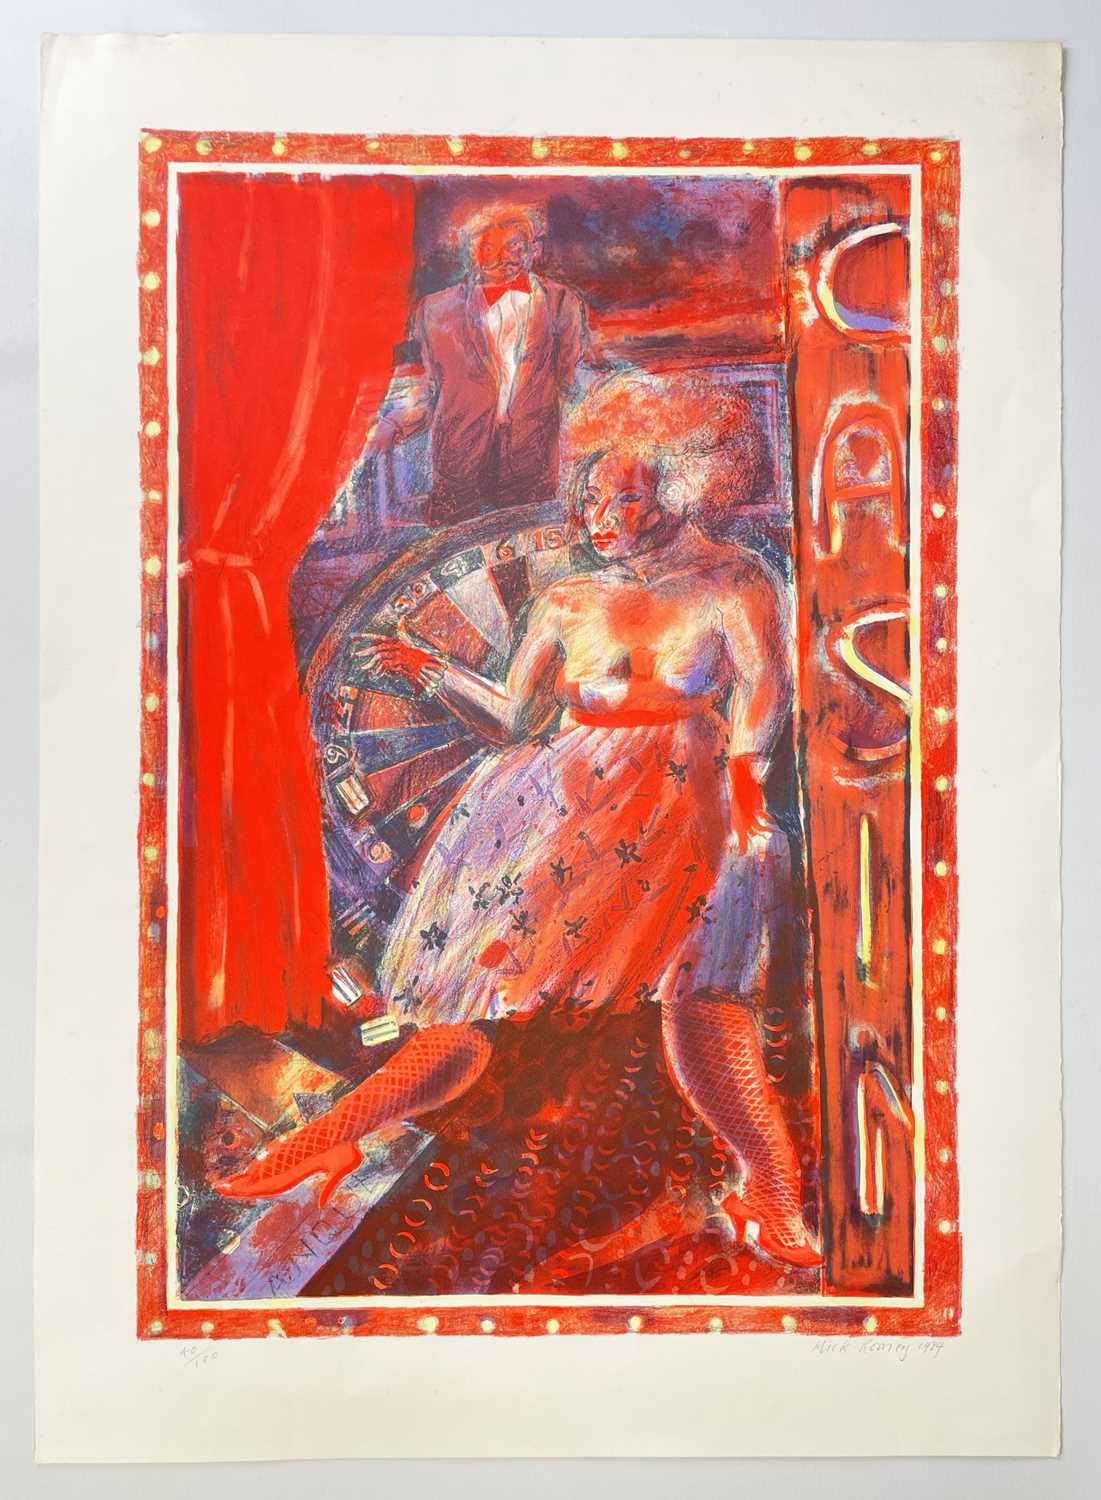 ‡ MICK ROONEY (b.1944) limited edition (40/100) lithograph - entitled, 'Casino' signed and dated